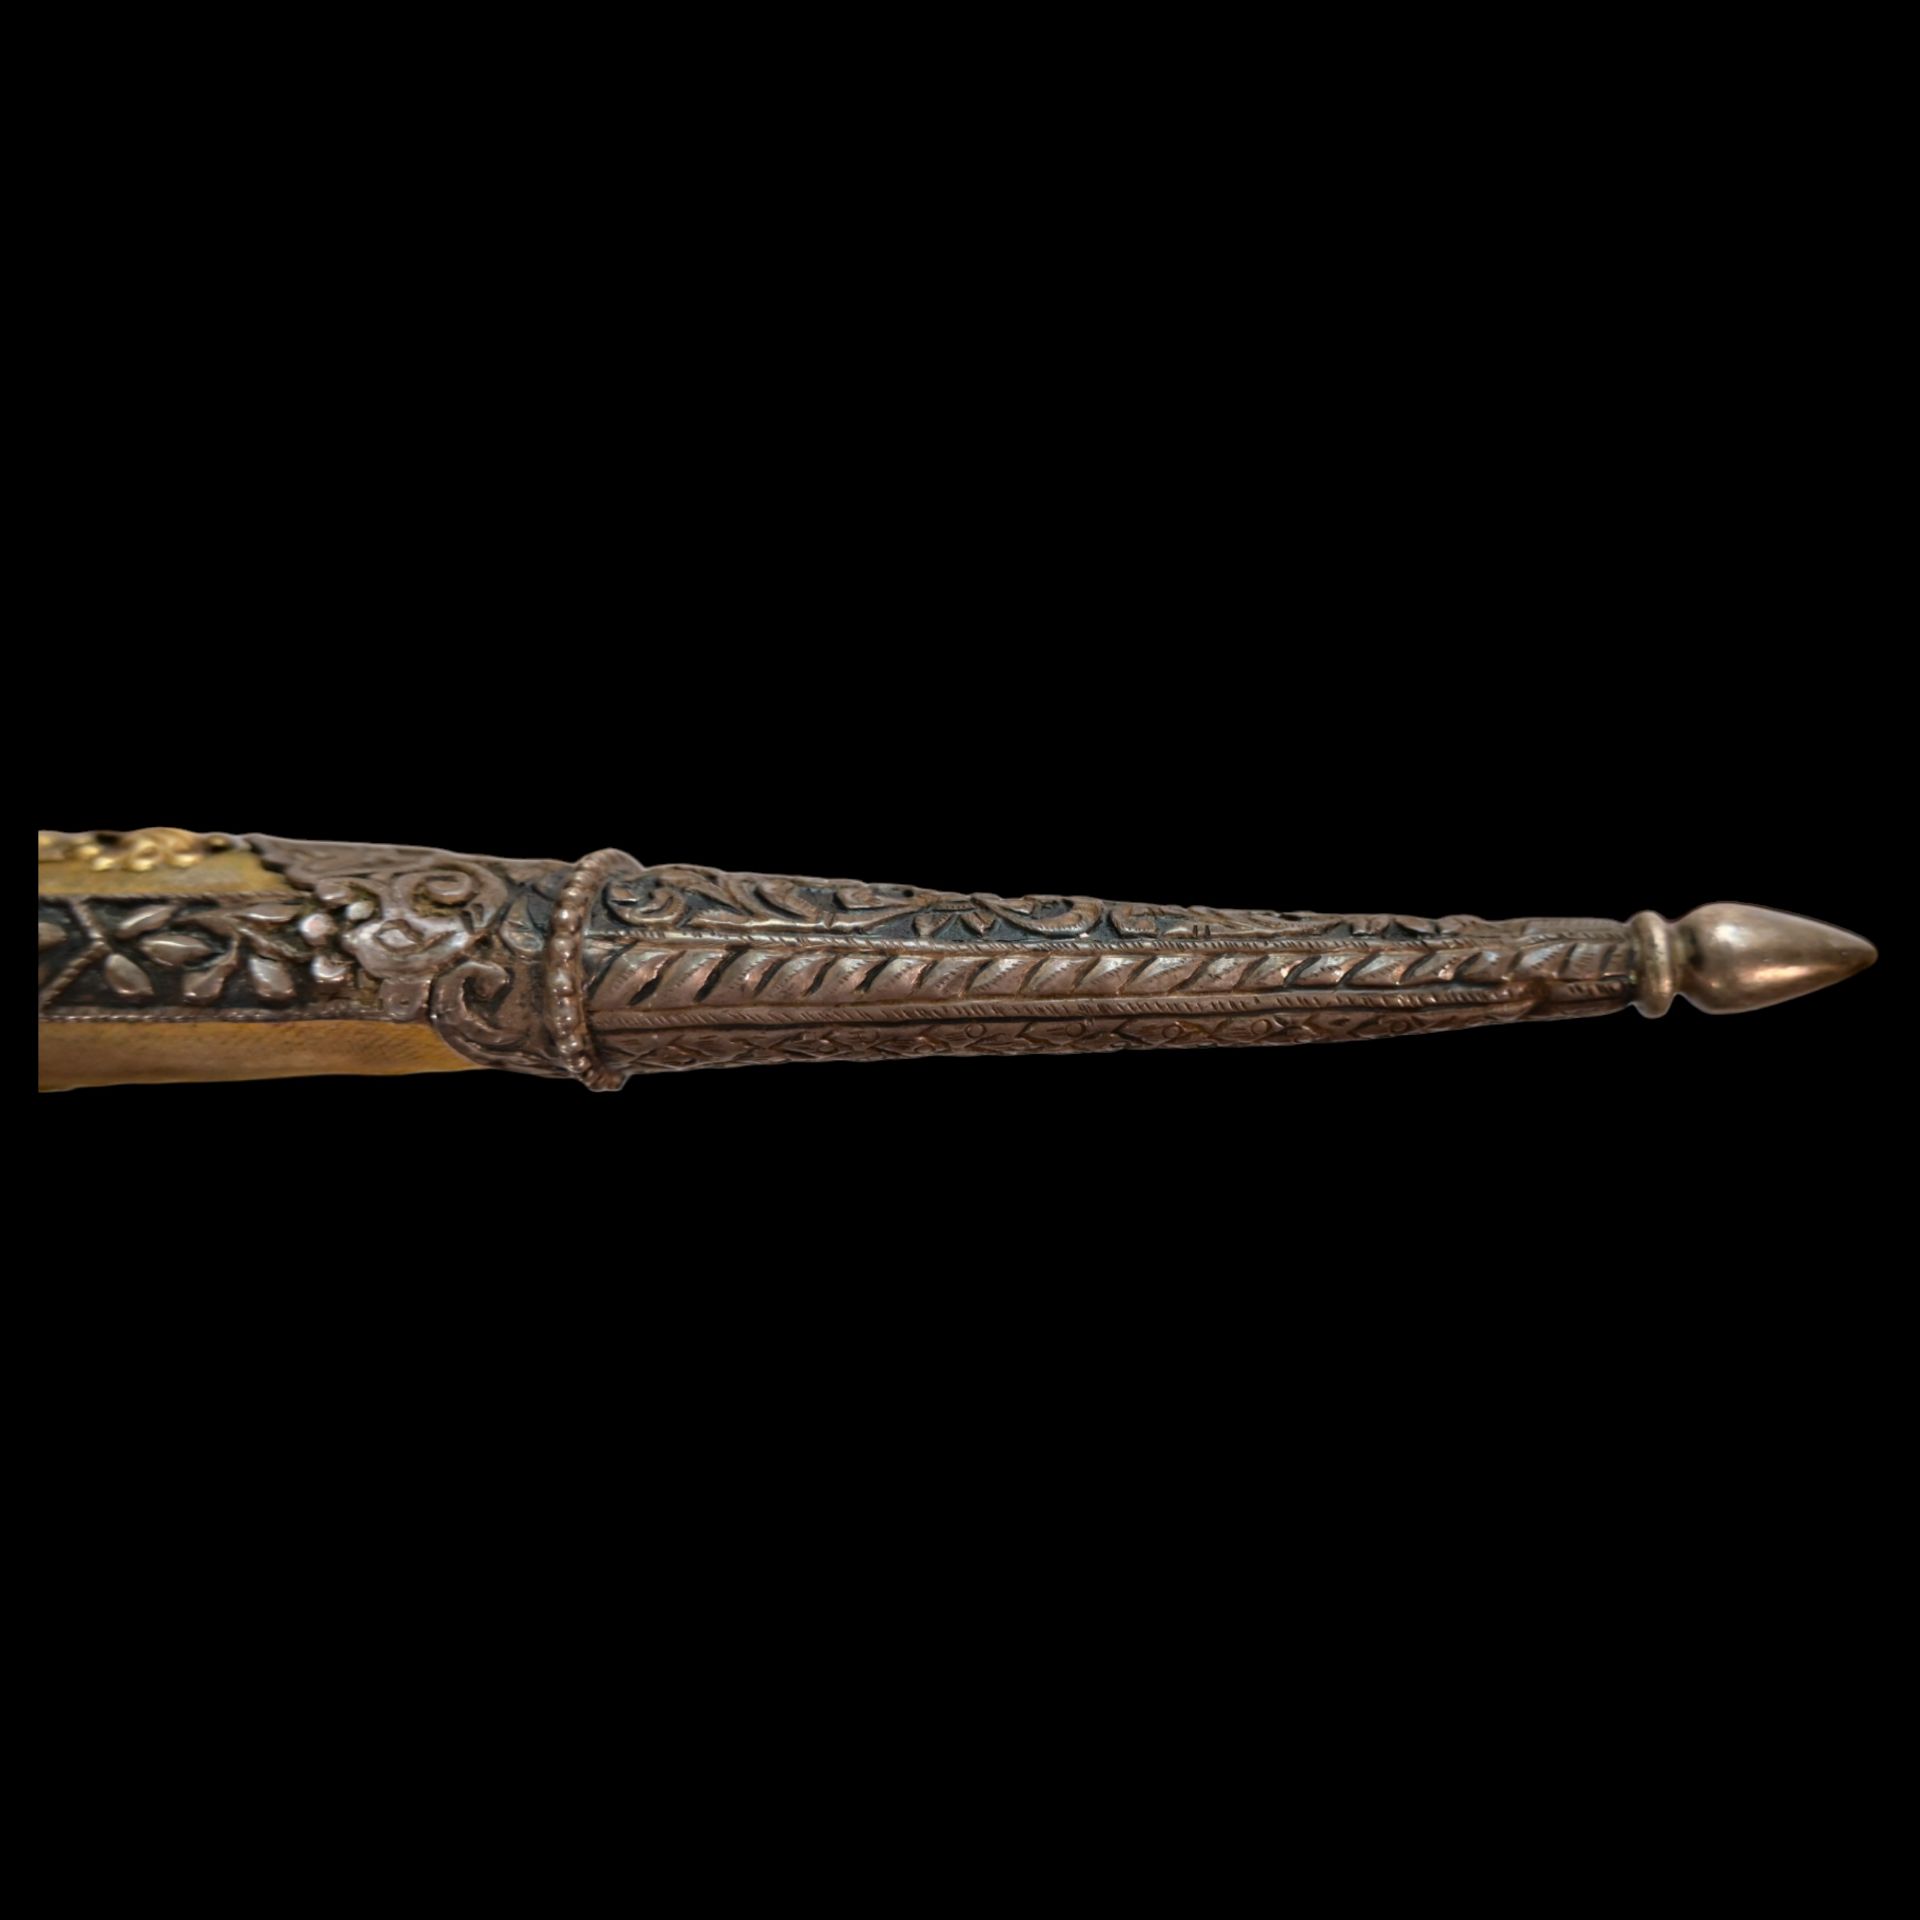 A PERSIAN ZAND DYNASTY KARD DAGGER WITH WOOTZ BLADE AND GOLD INLAY. - Image 13 of 27